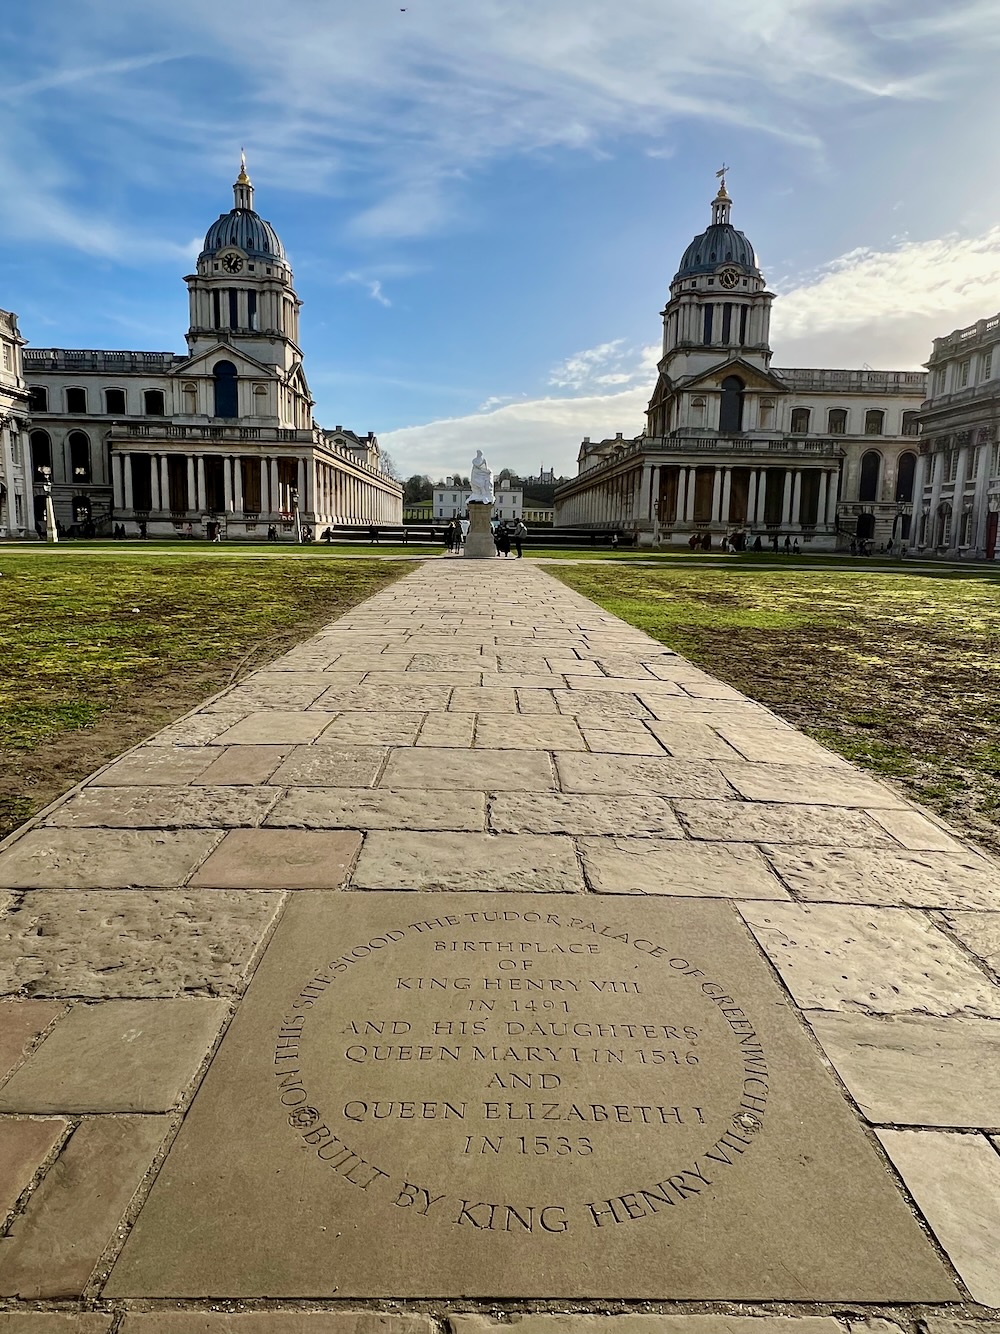 Plaque in Greenwich showing birthplace of King Henry VIII, Queen Mary I and Queen Elizabeth I. Photo Credit: © Ursula Petula Barzey.